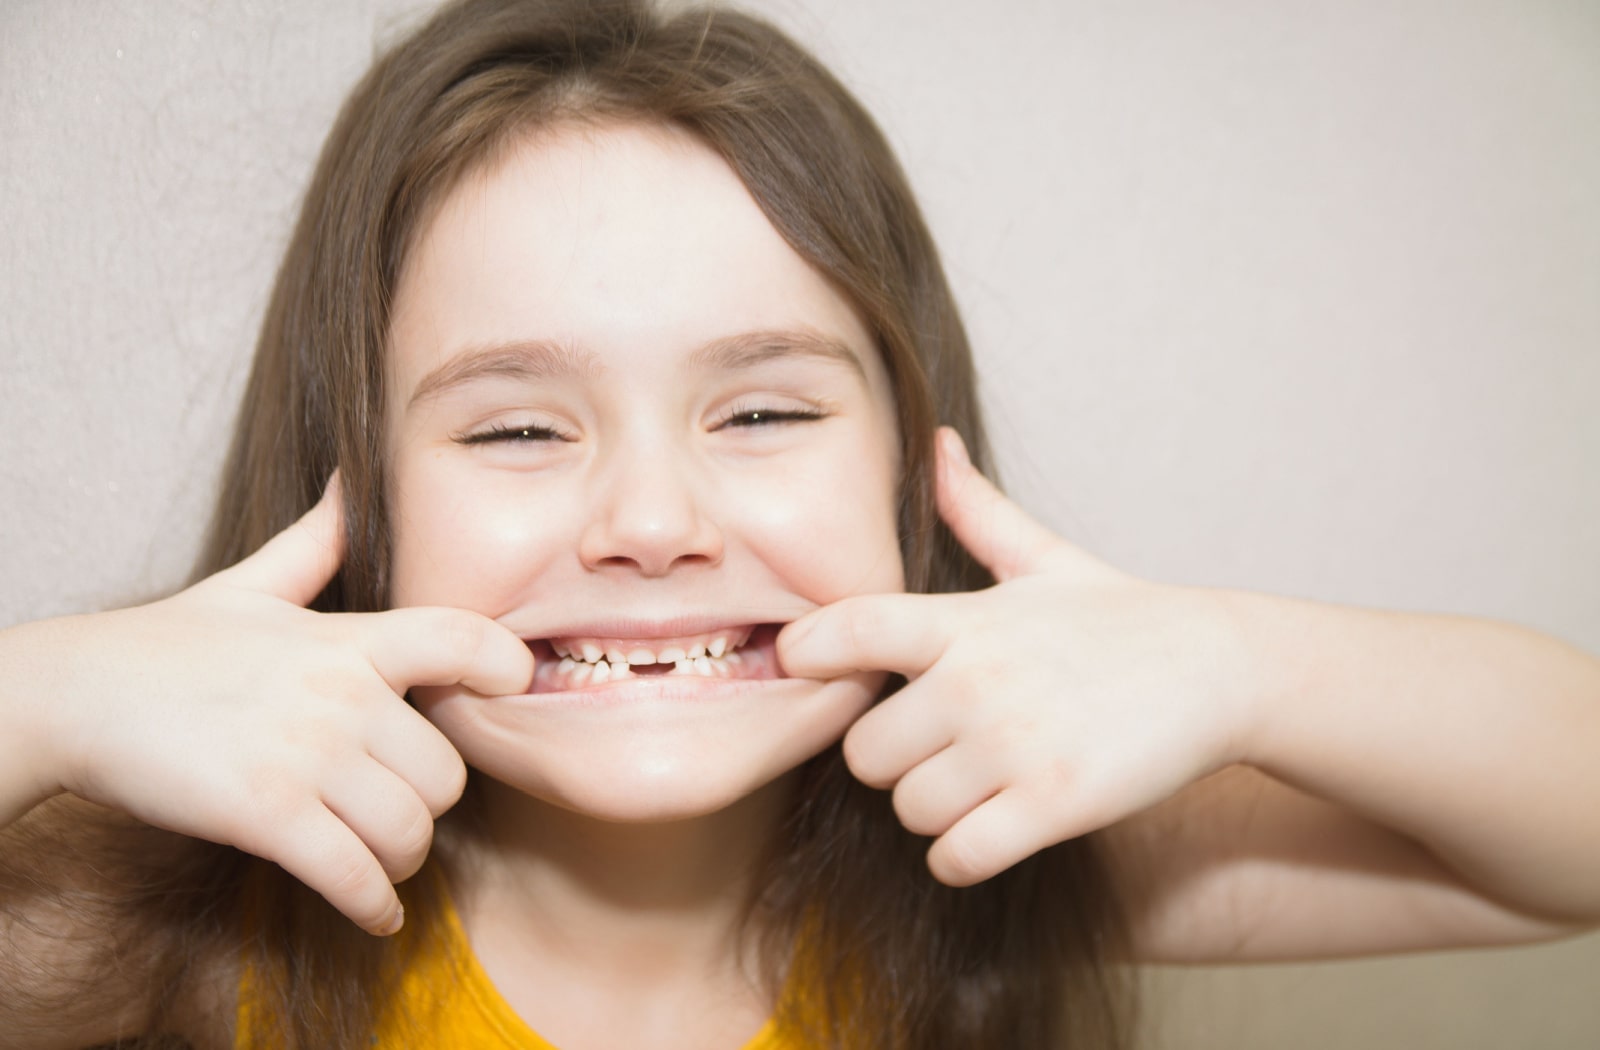 A young girl holding her mouth open to show her missing teeth